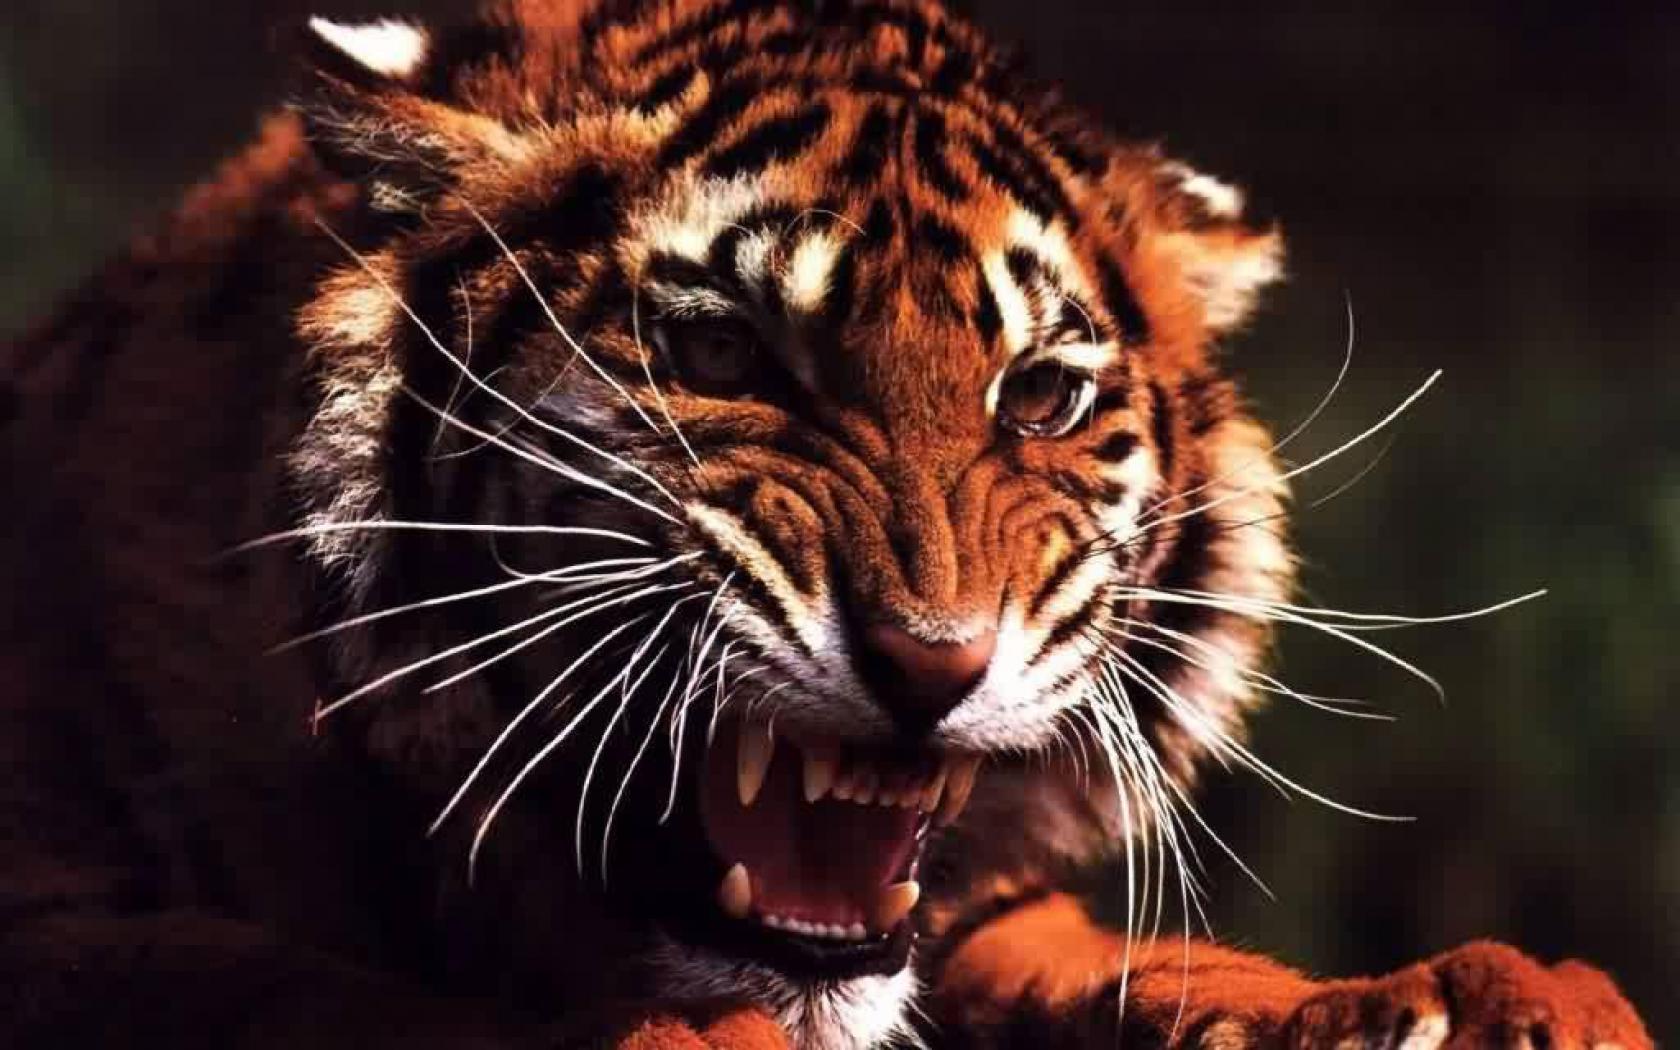 ANGRY WILD TIGER WALLPAPER - - HD Wallpapers